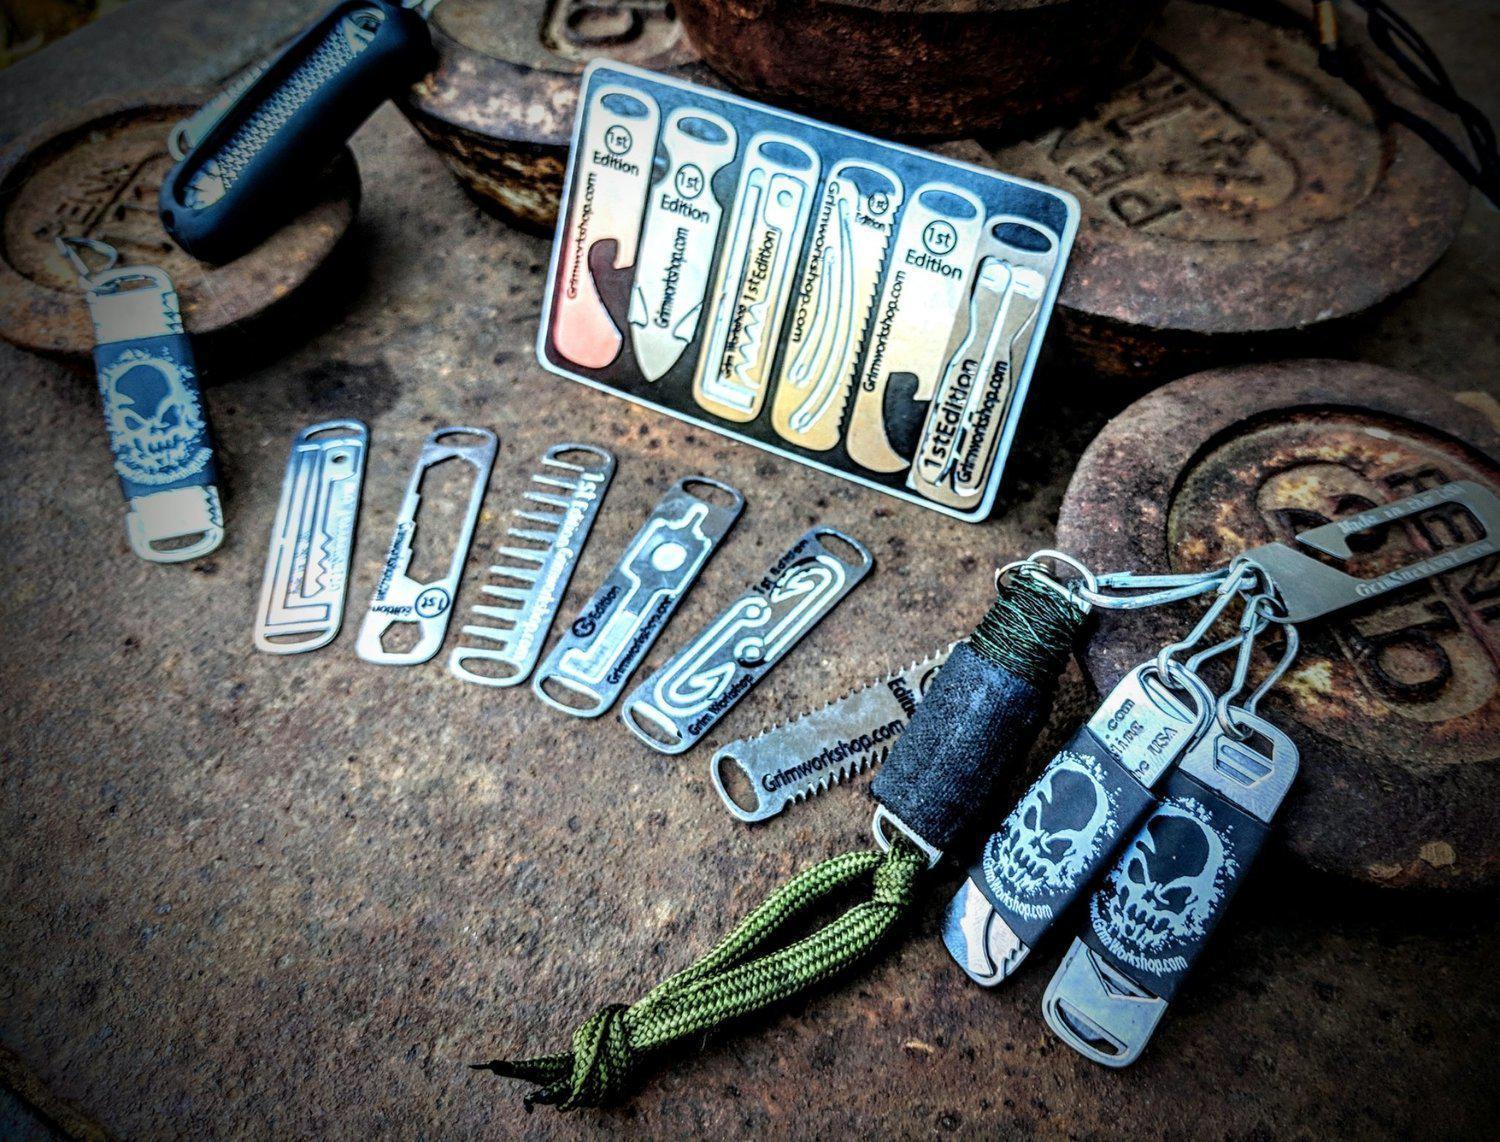 Credit Card Sized Micro Tool Holder (Tools not included)-Grimworkshop-bugoutbag-bushcraft-edc-gear-edctool-everydaycarry-survivalcard-survivalkit-wilderness-prepping-toolkit